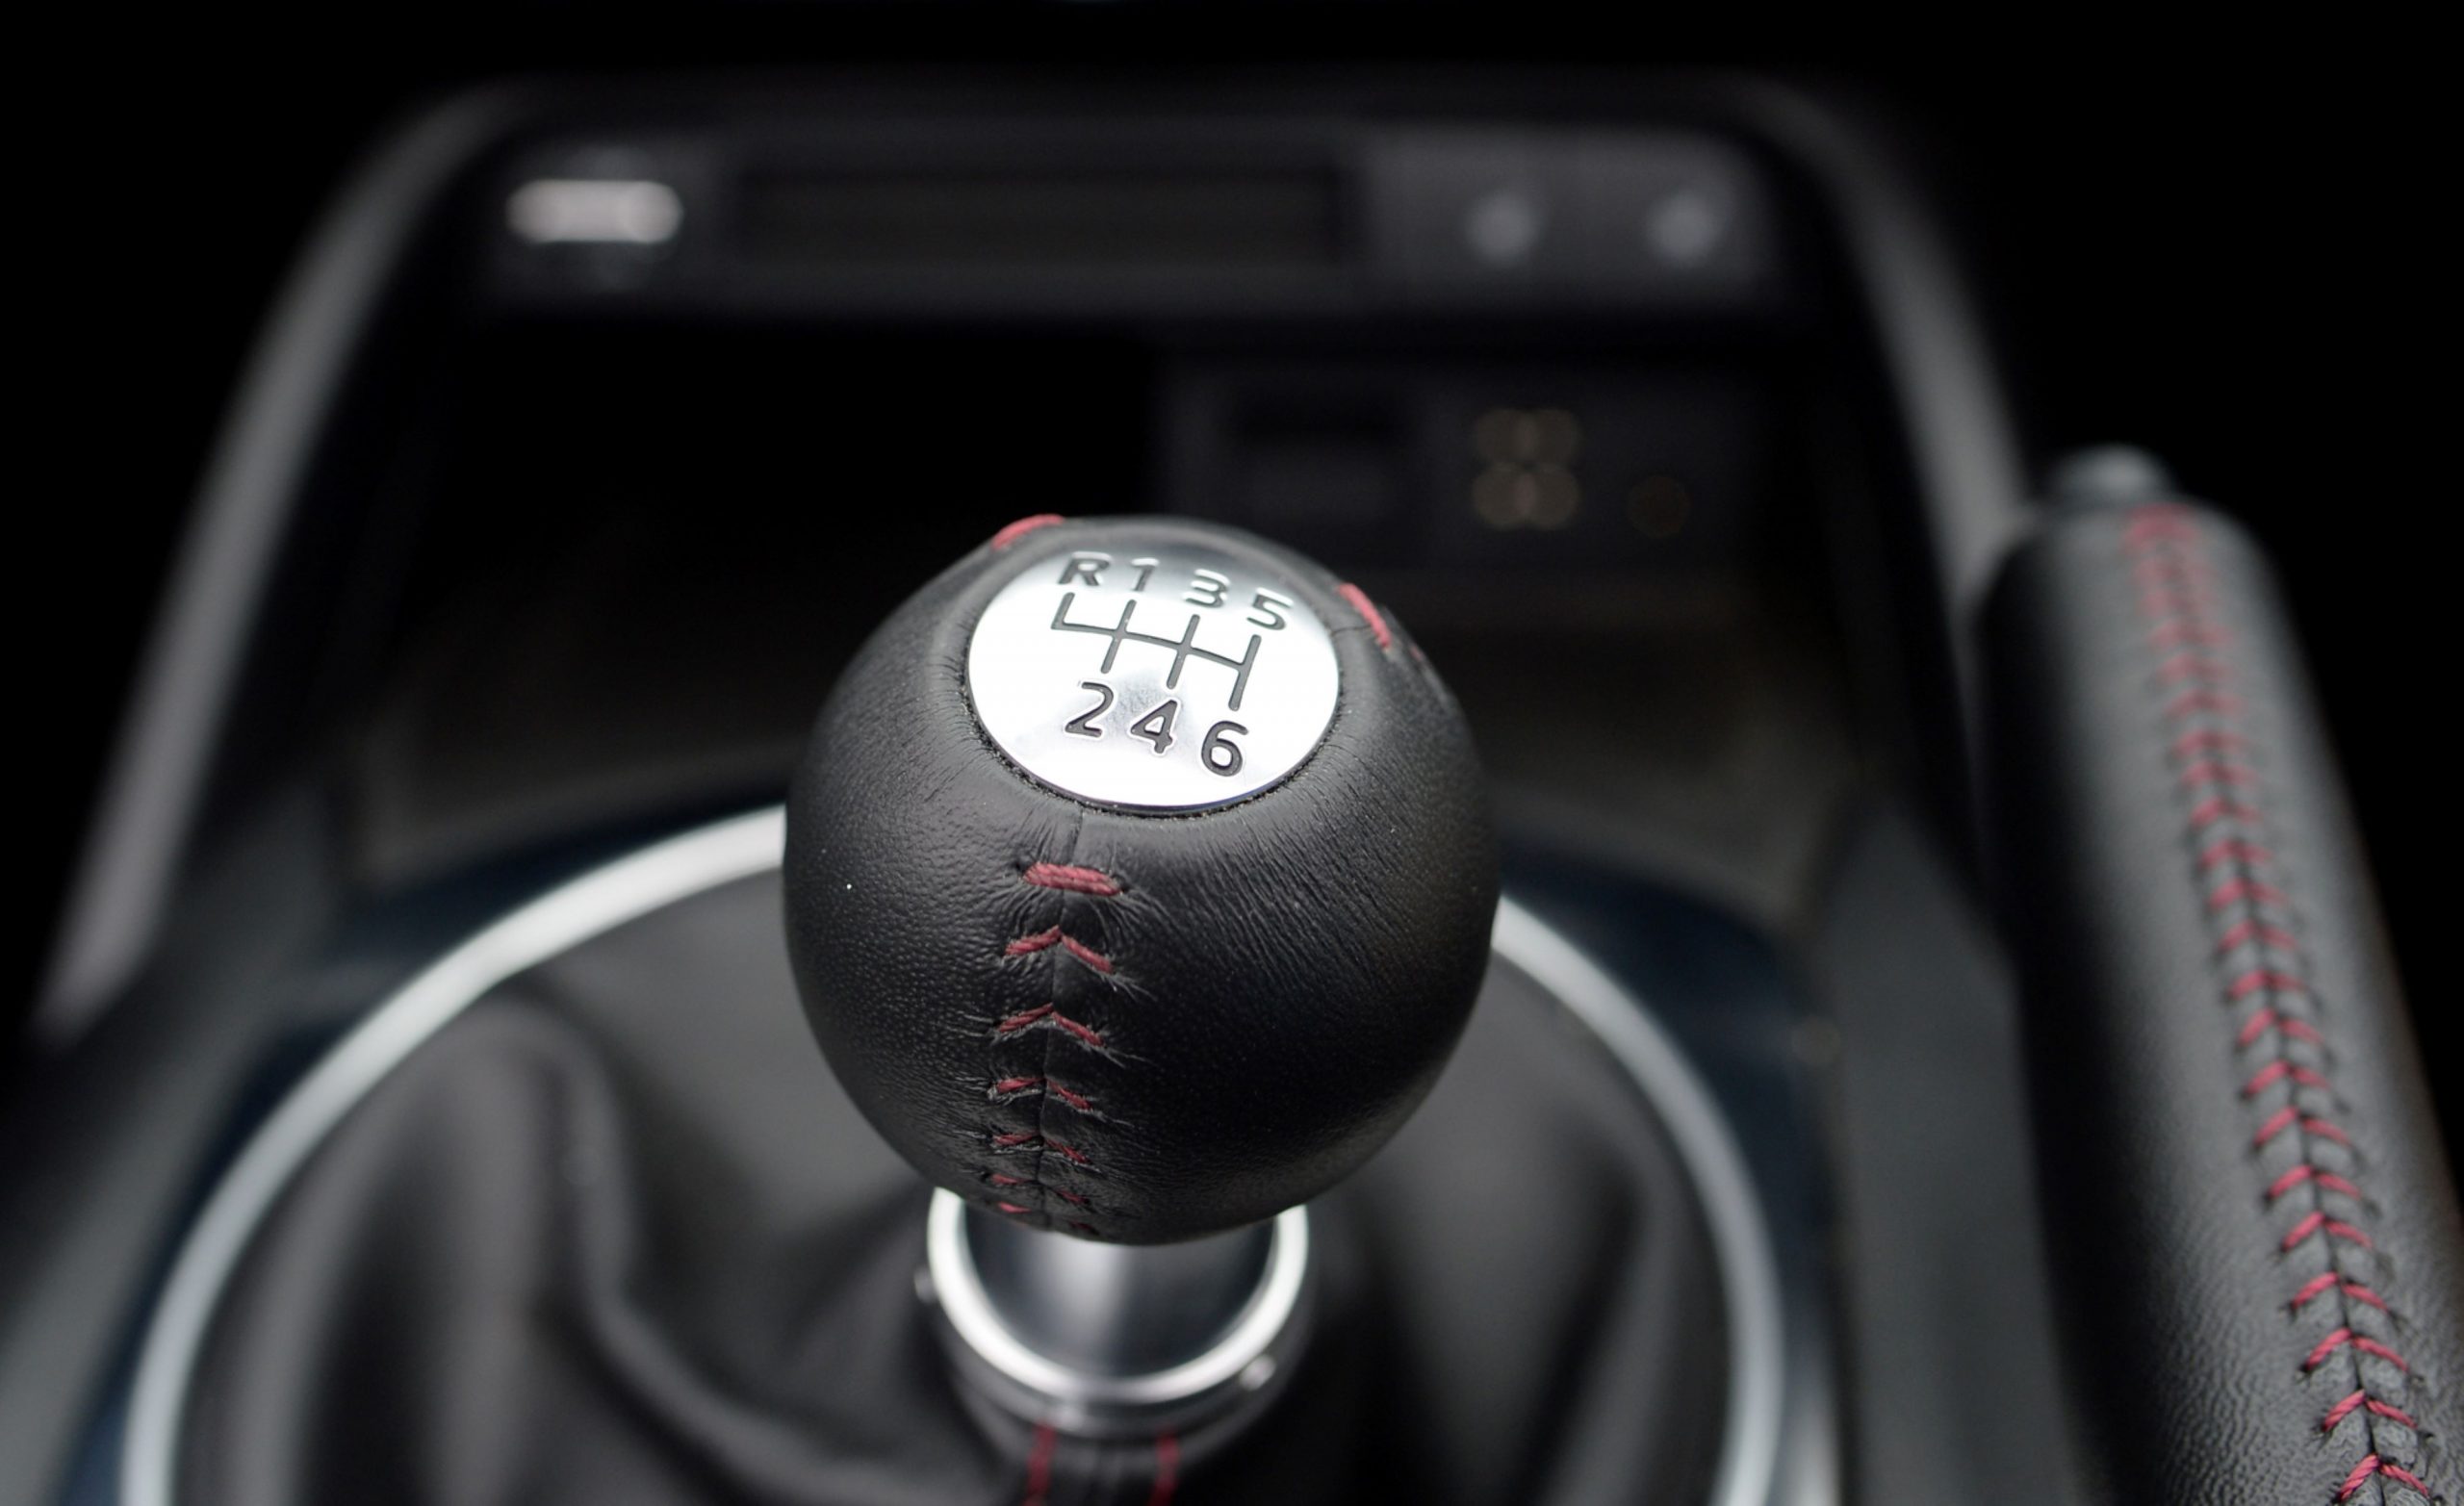 Manual transmission shift knob inside of a vehicle with black interior.